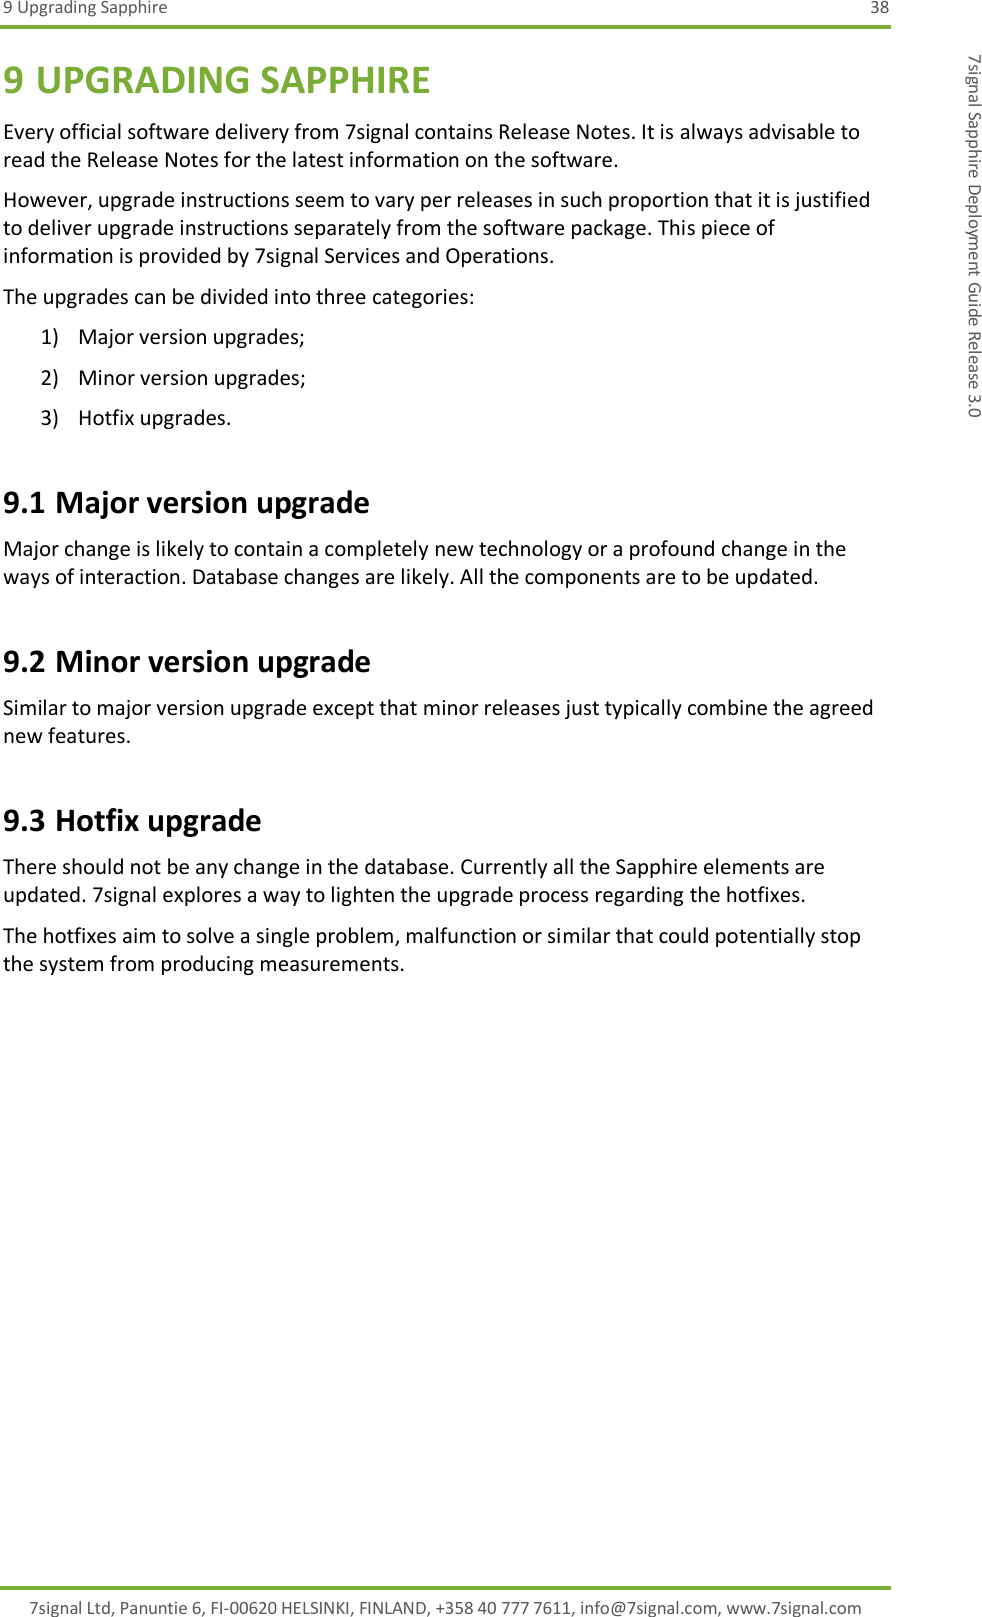 9 Upgrading Sapphire  38 7signal Ltd, Panuntie 6, FI-00620 HELSINKI, FINLAND, +358 40 777 7611, info@7signal.com, www.7signal.com 7signal Sapphire Deployment Guide Release 3.0 9 UPGRADING SAPPHIRE Every official software delivery from 7signal contains Release Notes. It is always advisable to read the Release Notes for the latest information on the software. However, upgrade instructions seem to vary per releases in such proportion that it is justified to deliver upgrade instructions separately from the software package. This piece of information is provided by 7signal Services and Operations. The upgrades can be divided into three categories: 1) Major version upgrades; 2) Minor version upgrades; 3) Hotfix upgrades. 9.1 Major version upgrade Major change is likely to contain a completely new technology or a profound change in the ways of interaction. Database changes are likely. All the components are to be updated. 9.2 Minor version upgrade Similar to major version upgrade except that minor releases just typically combine the agreed new features. 9.3 Hotfix upgrade There should not be any change in the database. Currently all the Sapphire elements are updated. 7signal explores a way to lighten the upgrade process regarding the hotfixes. The hotfixes aim to solve a single problem, malfunction or similar that could potentially stop the system from producing measurements. 